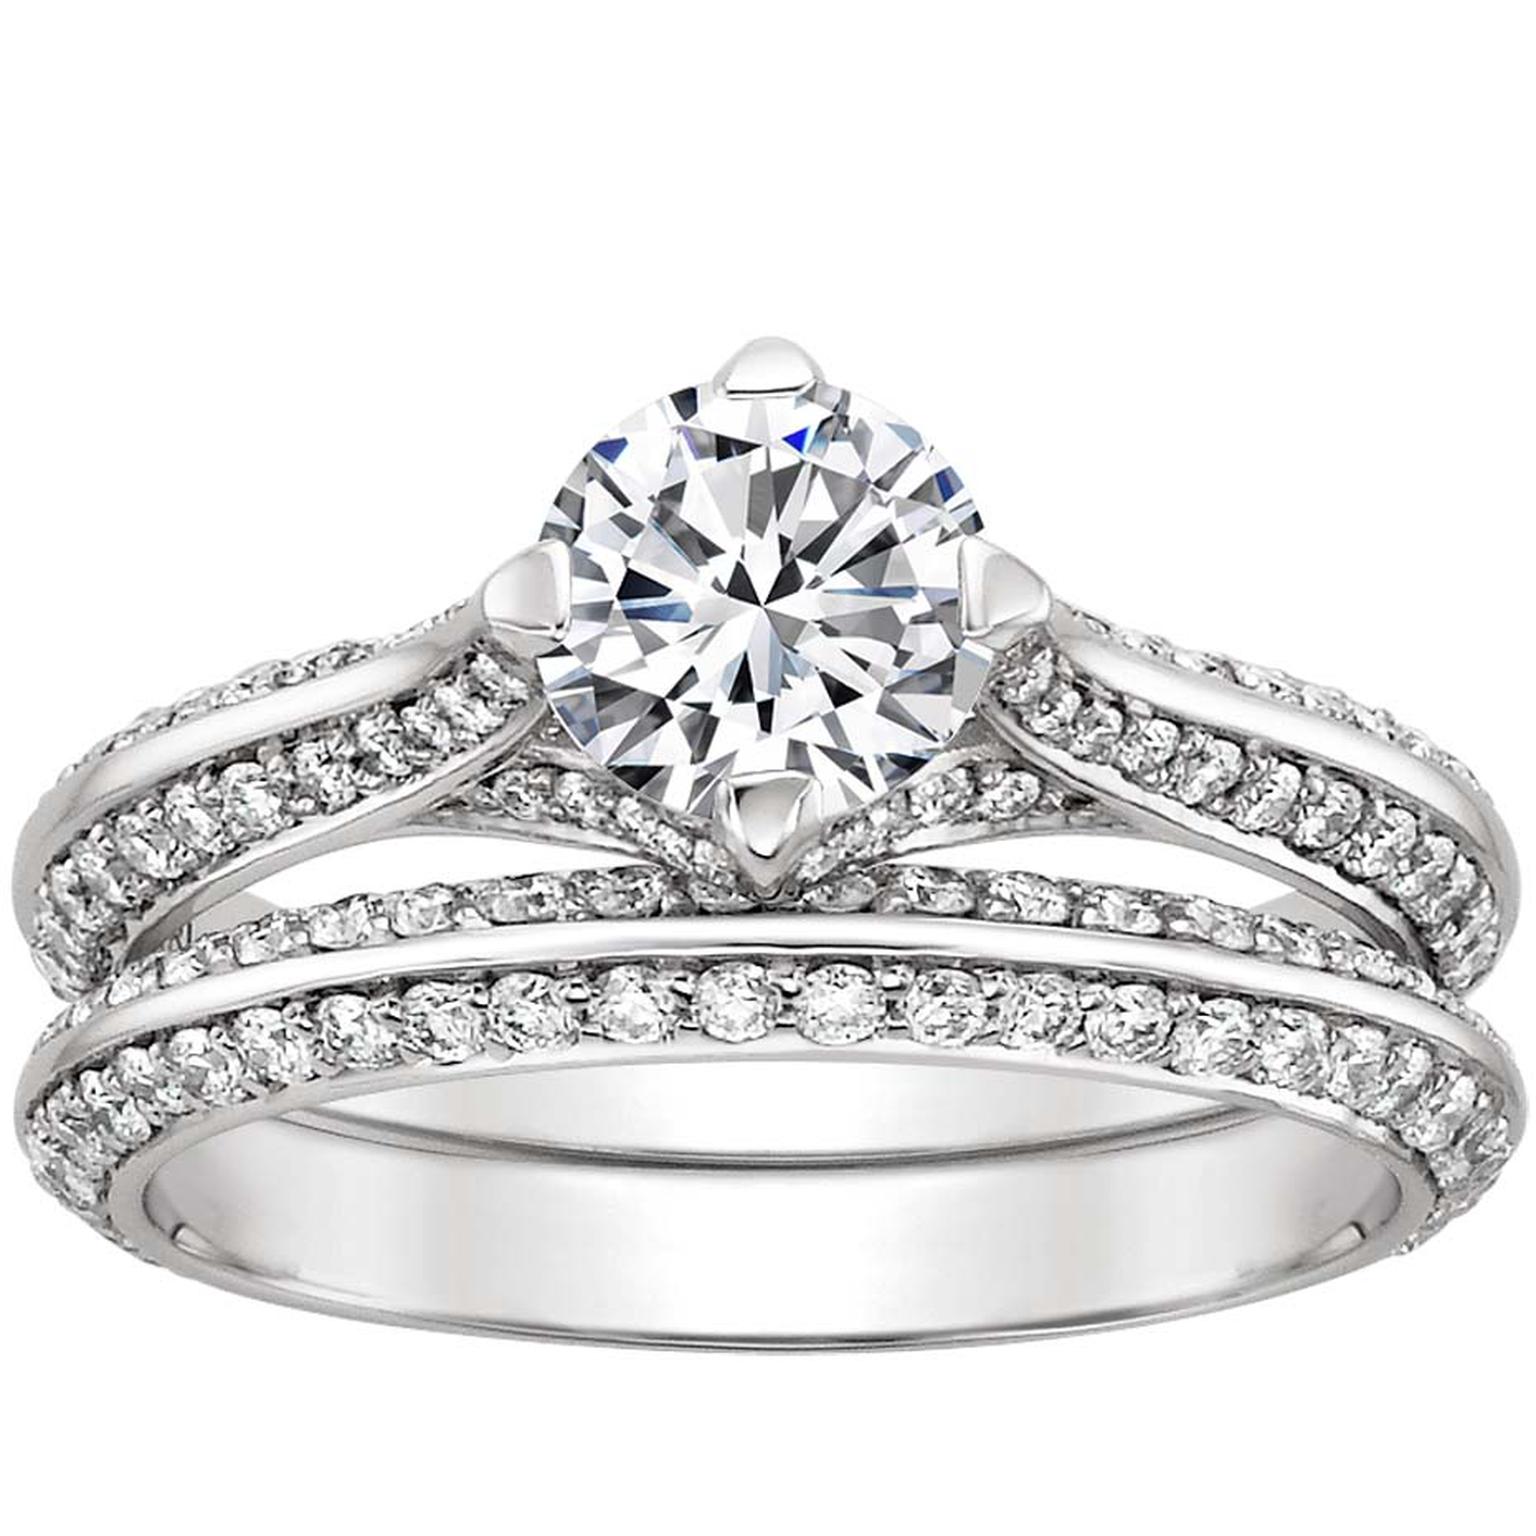 Ethical engagement rings: where to find conflict free diamonds and fairtrade gold